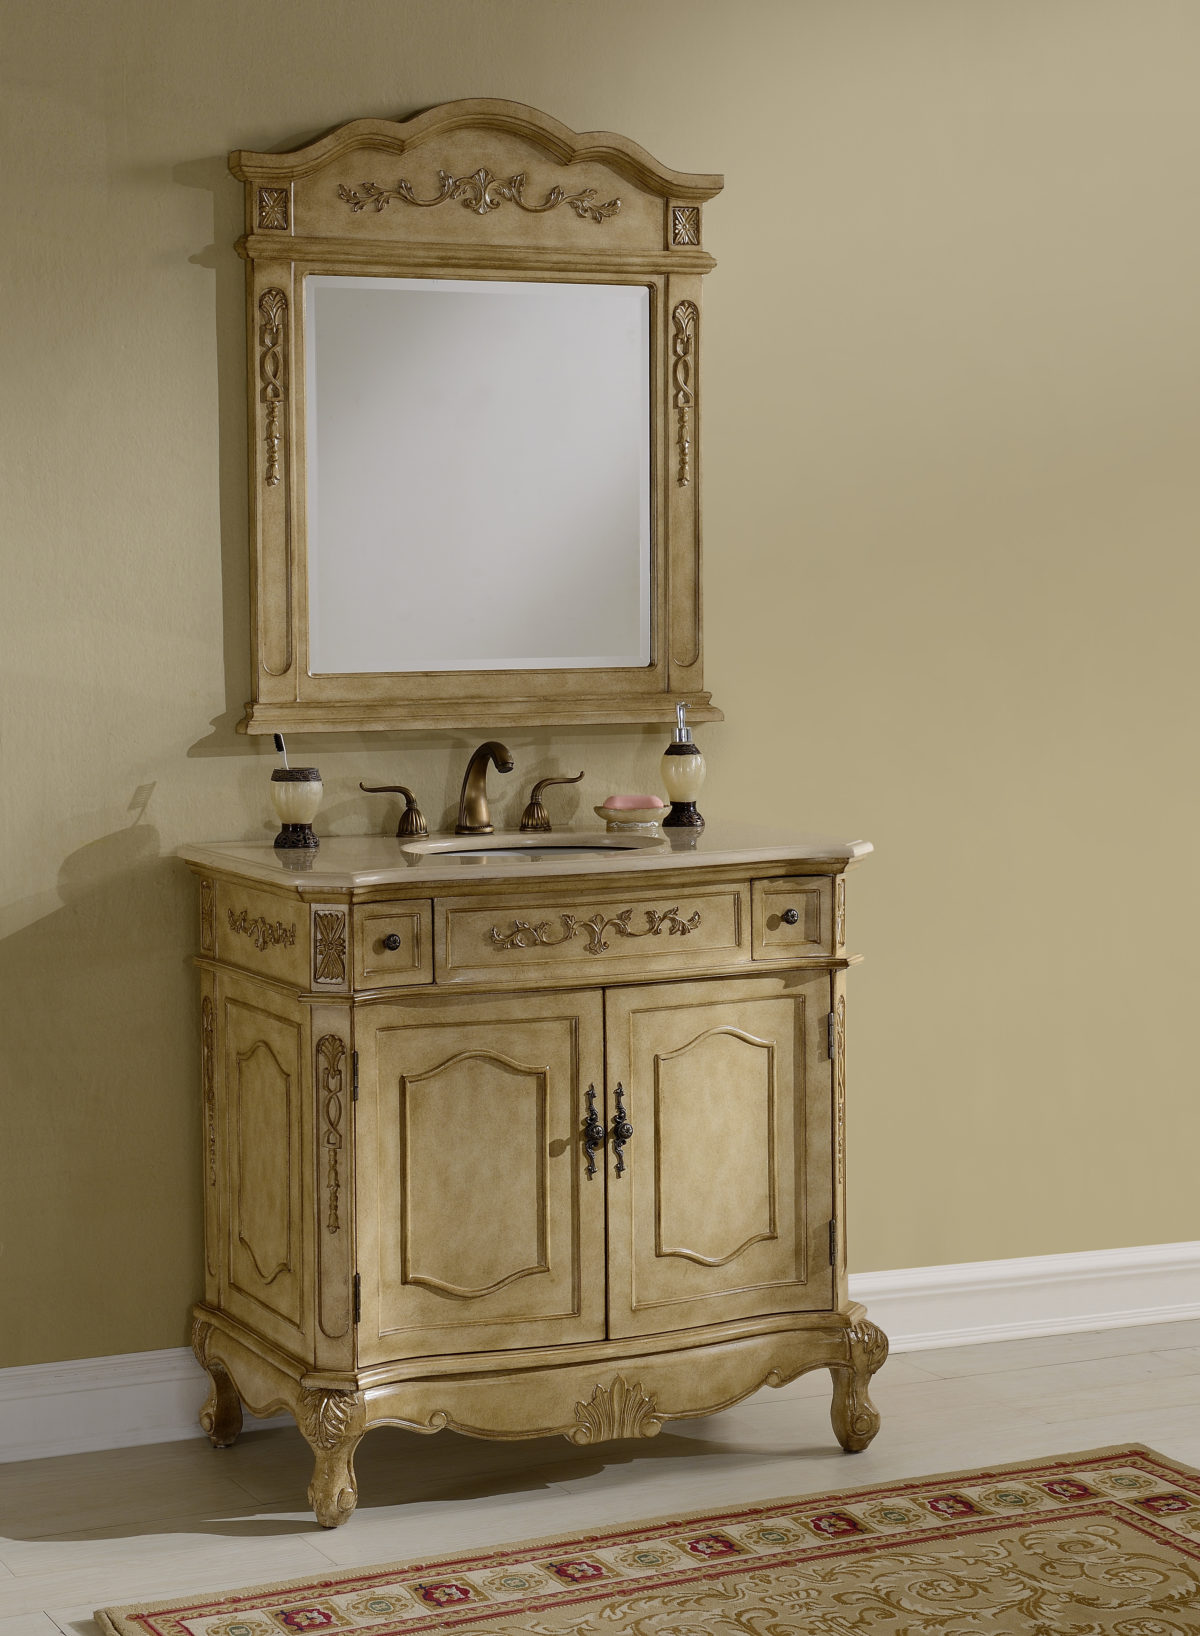 36" Antique Tan Finish Vanity with Mirror, Med Cab, and Linen Cabinet Options